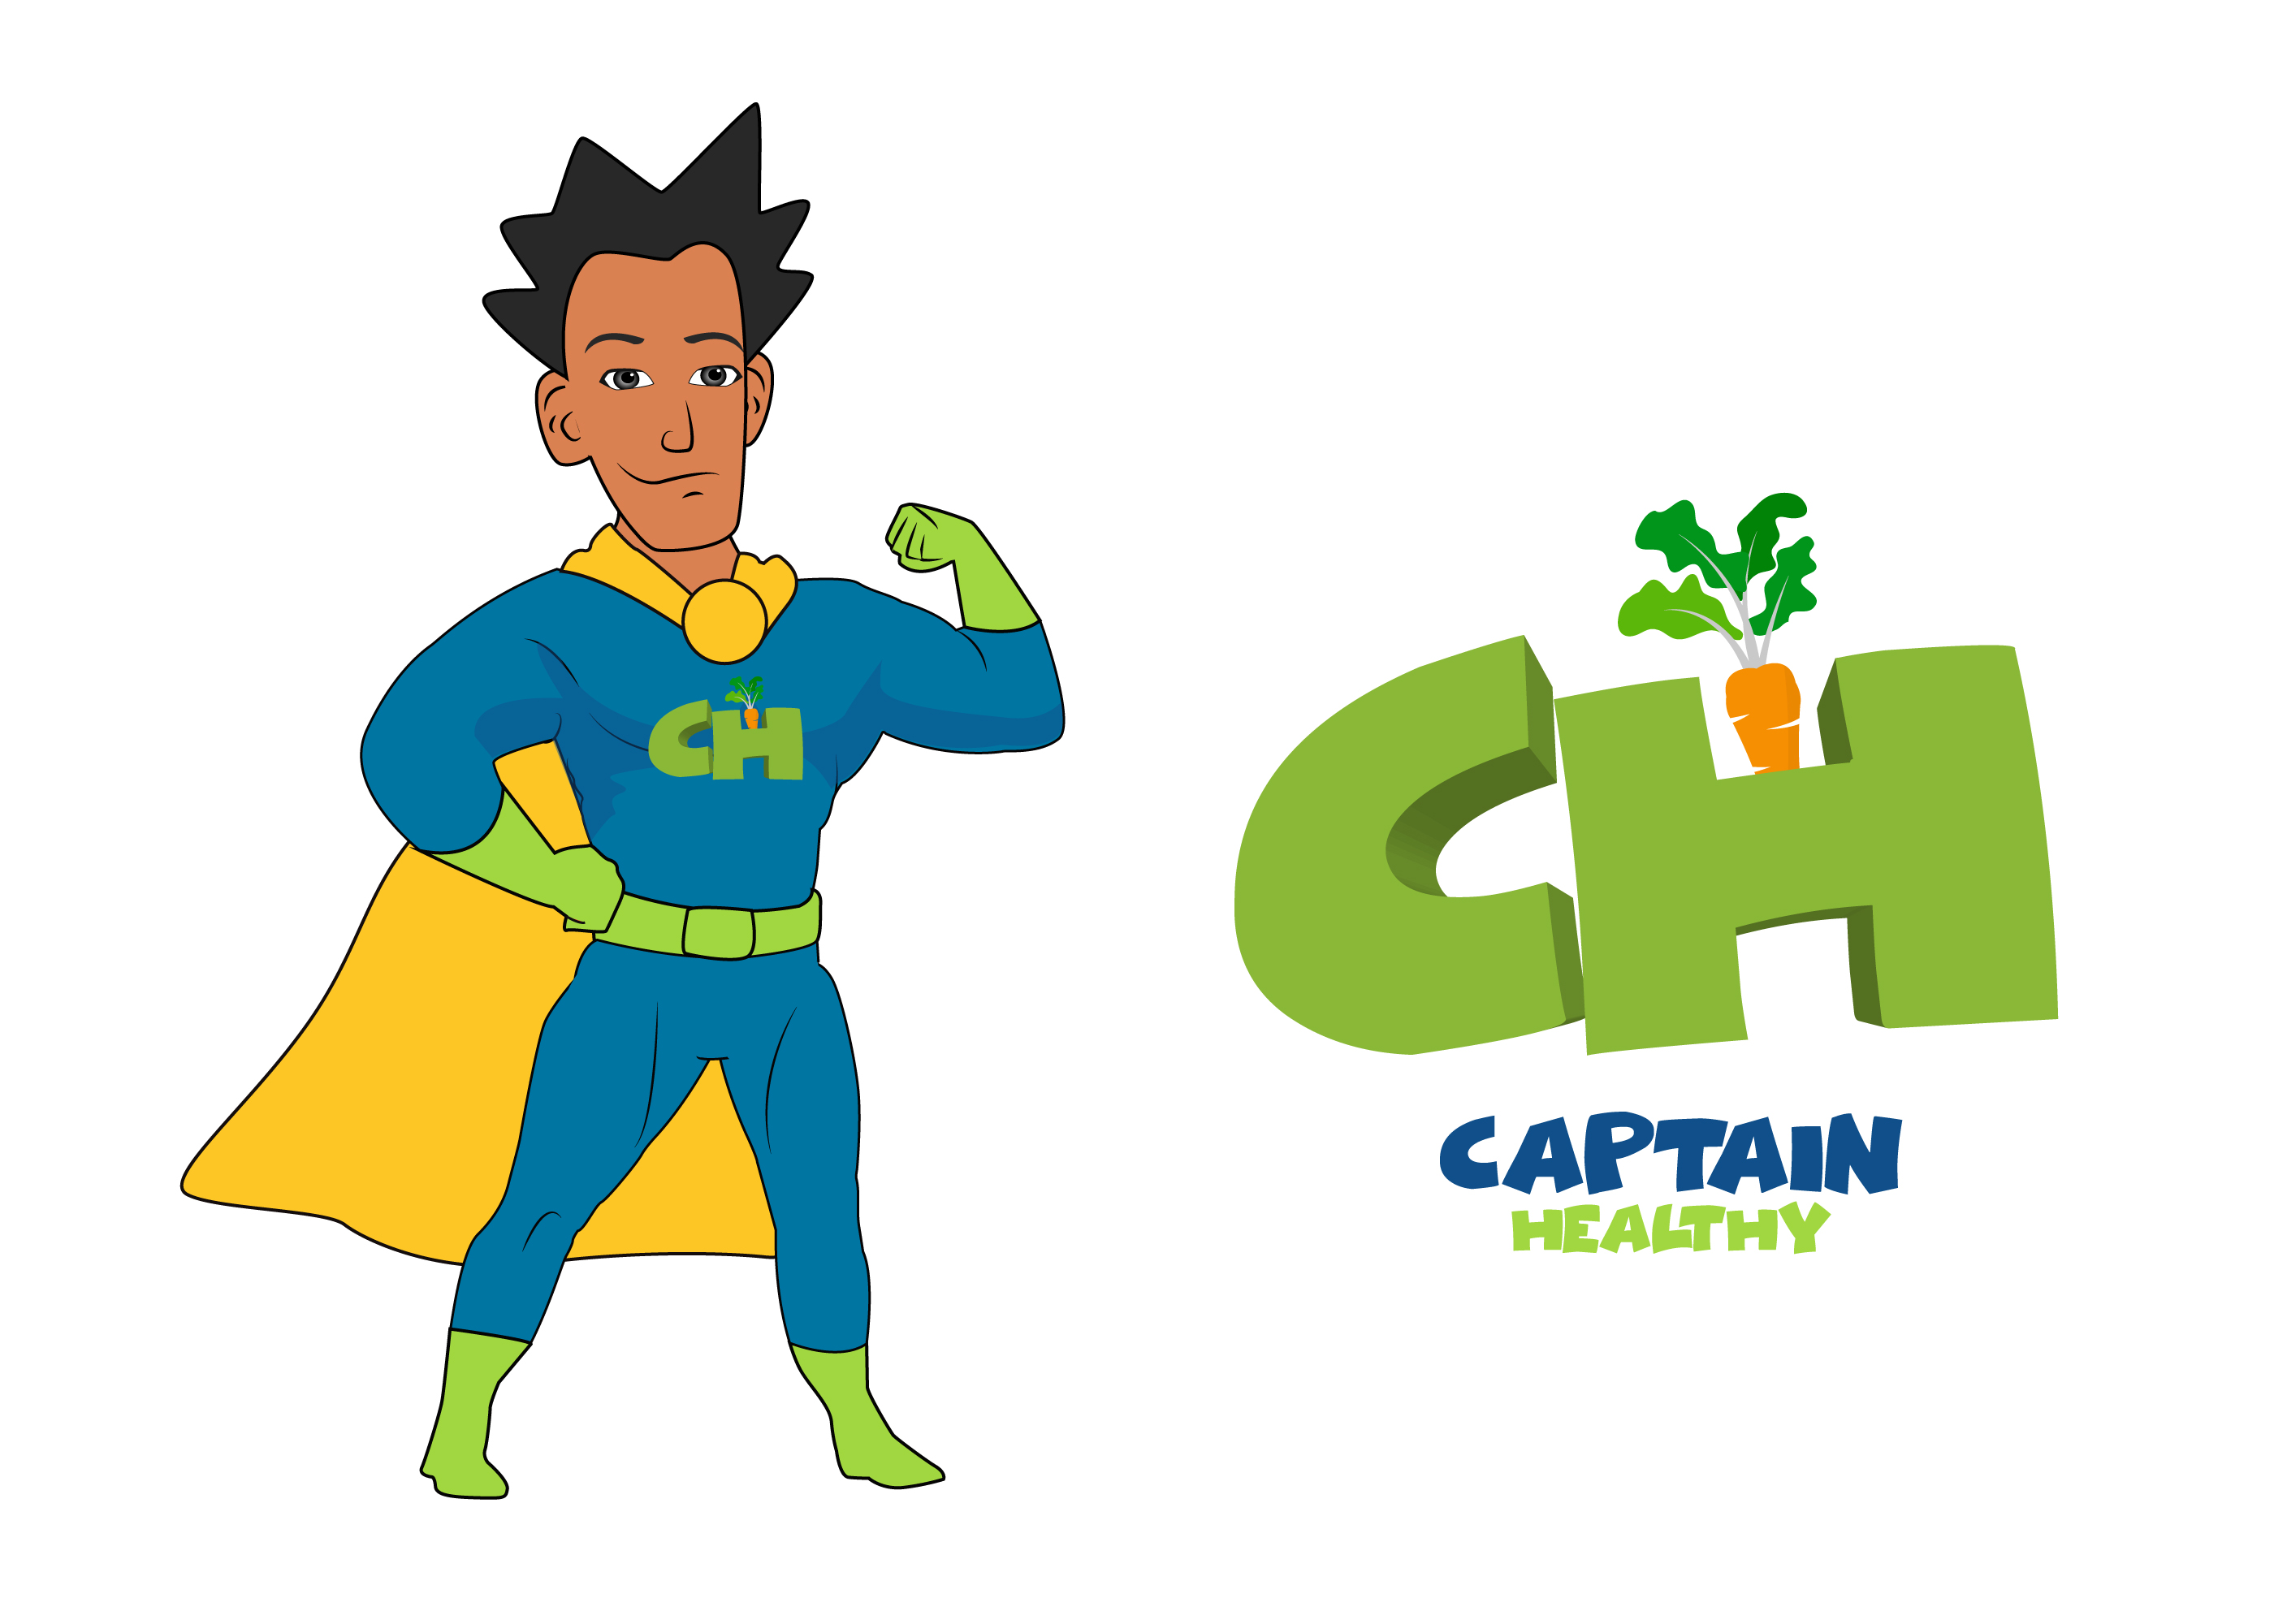 Help Captain Healthy build simple animations and games for his child friendly website